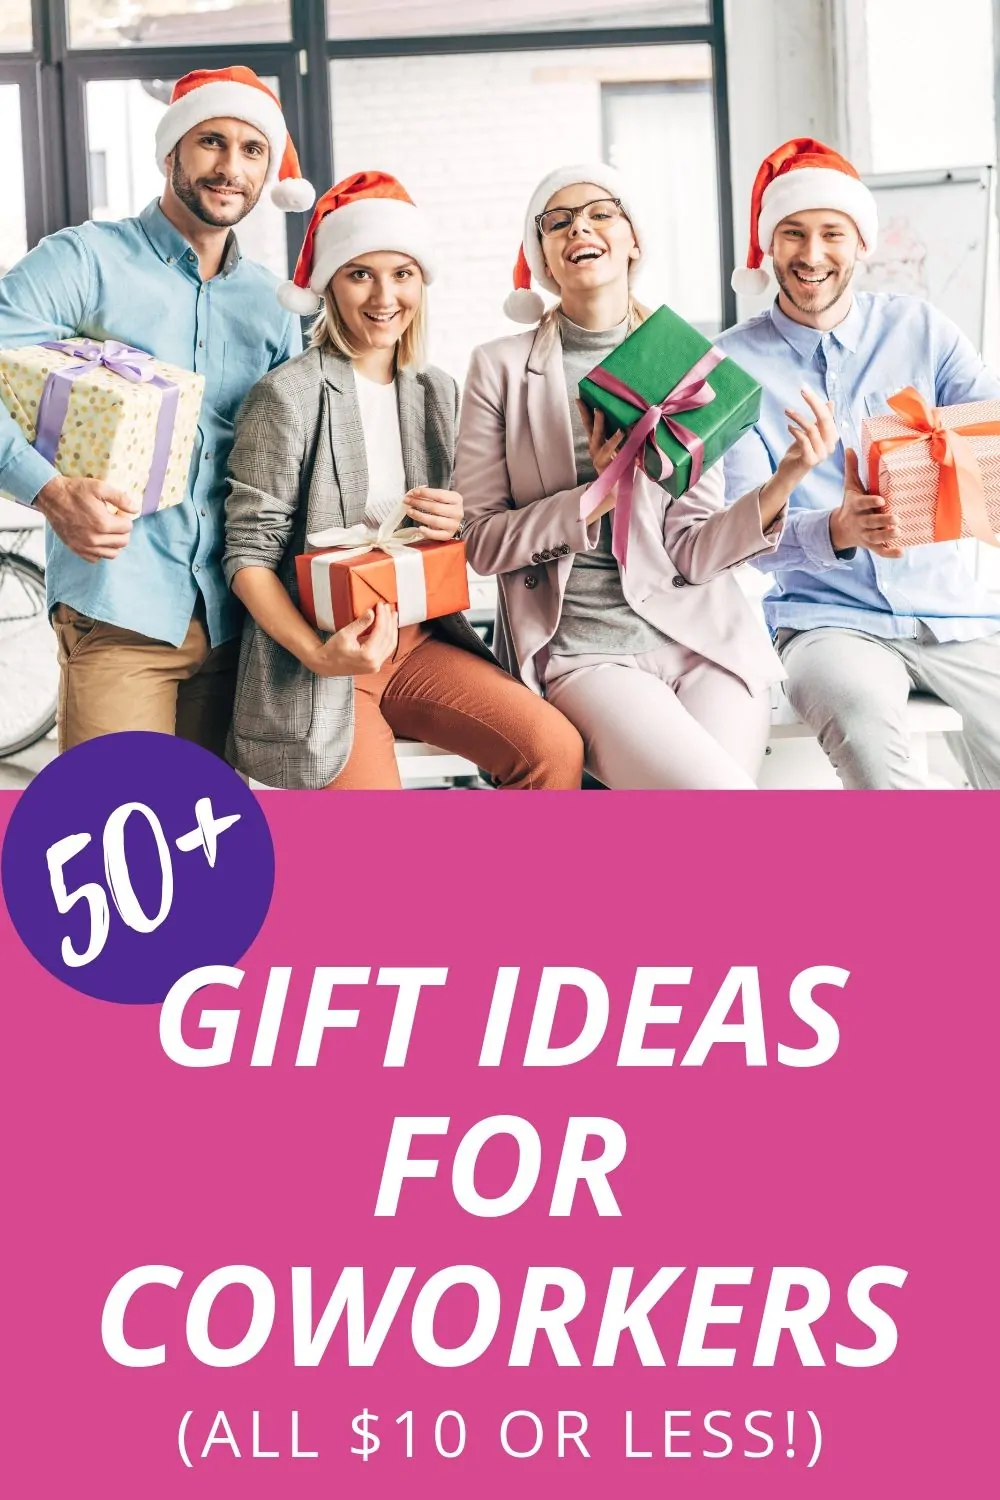 50+ $10 gift ideas for coworkers